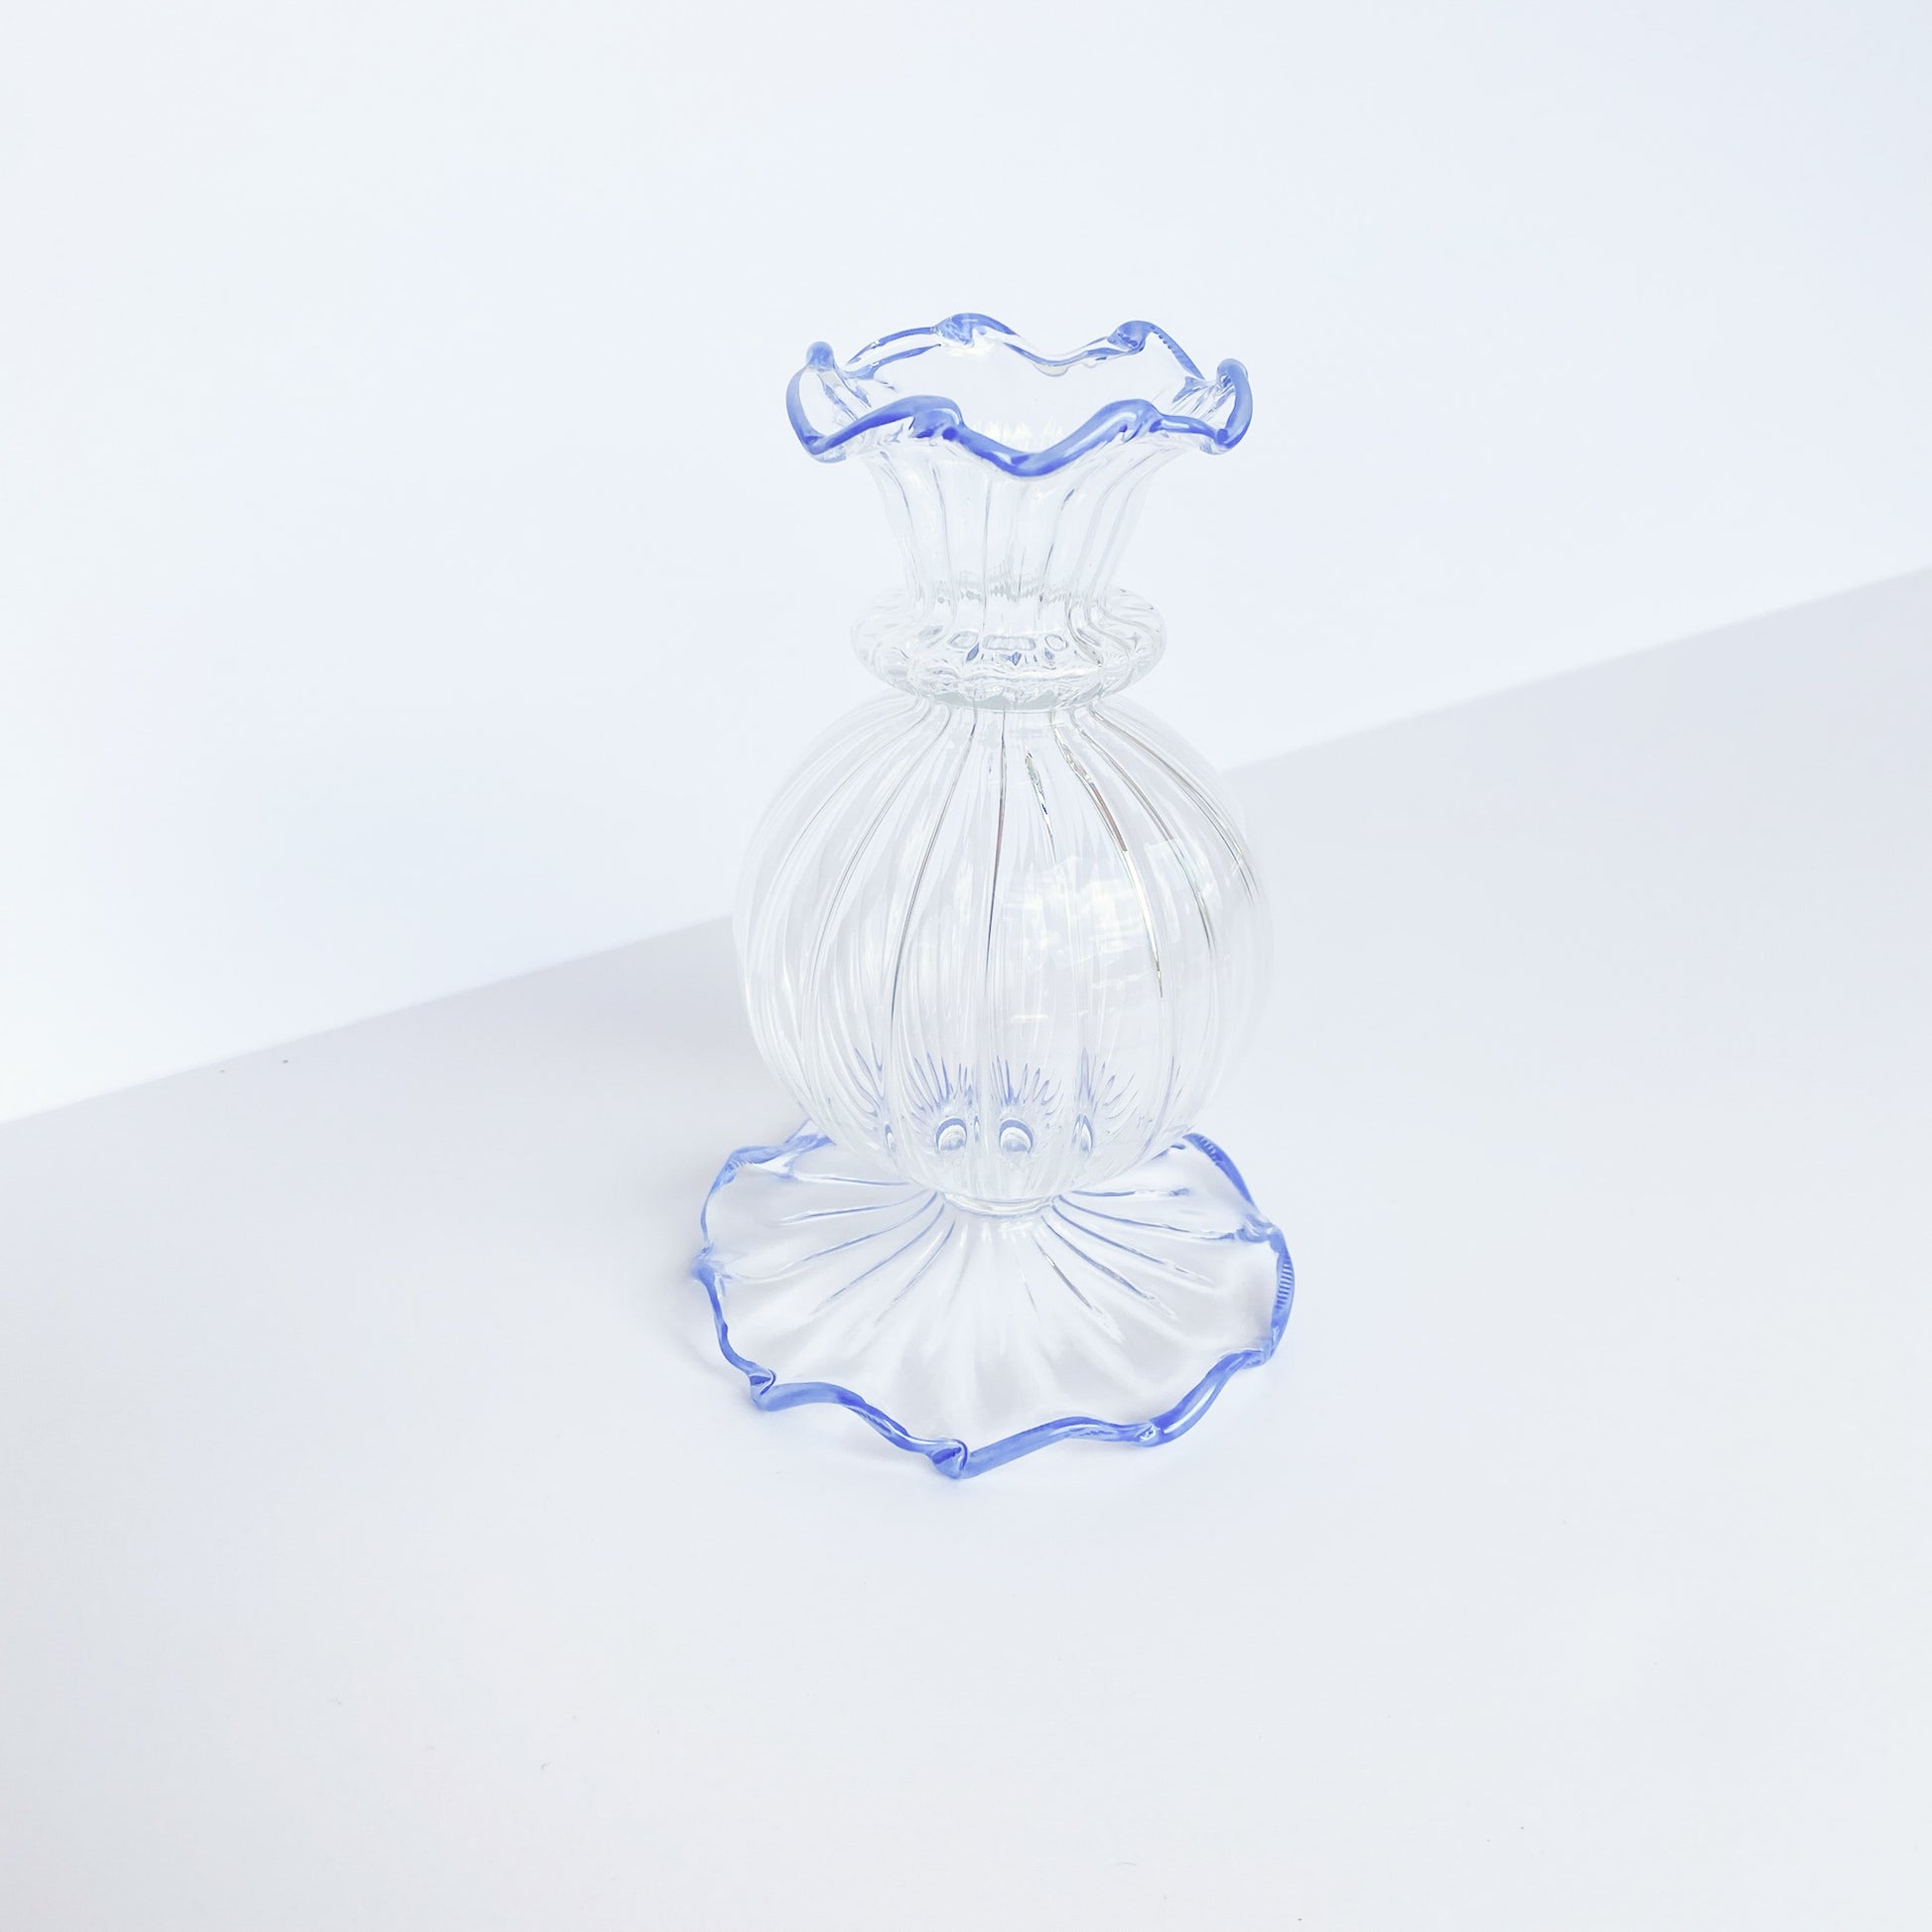 Clear glass bud vase with ruffled blue rim at the top and bottom.